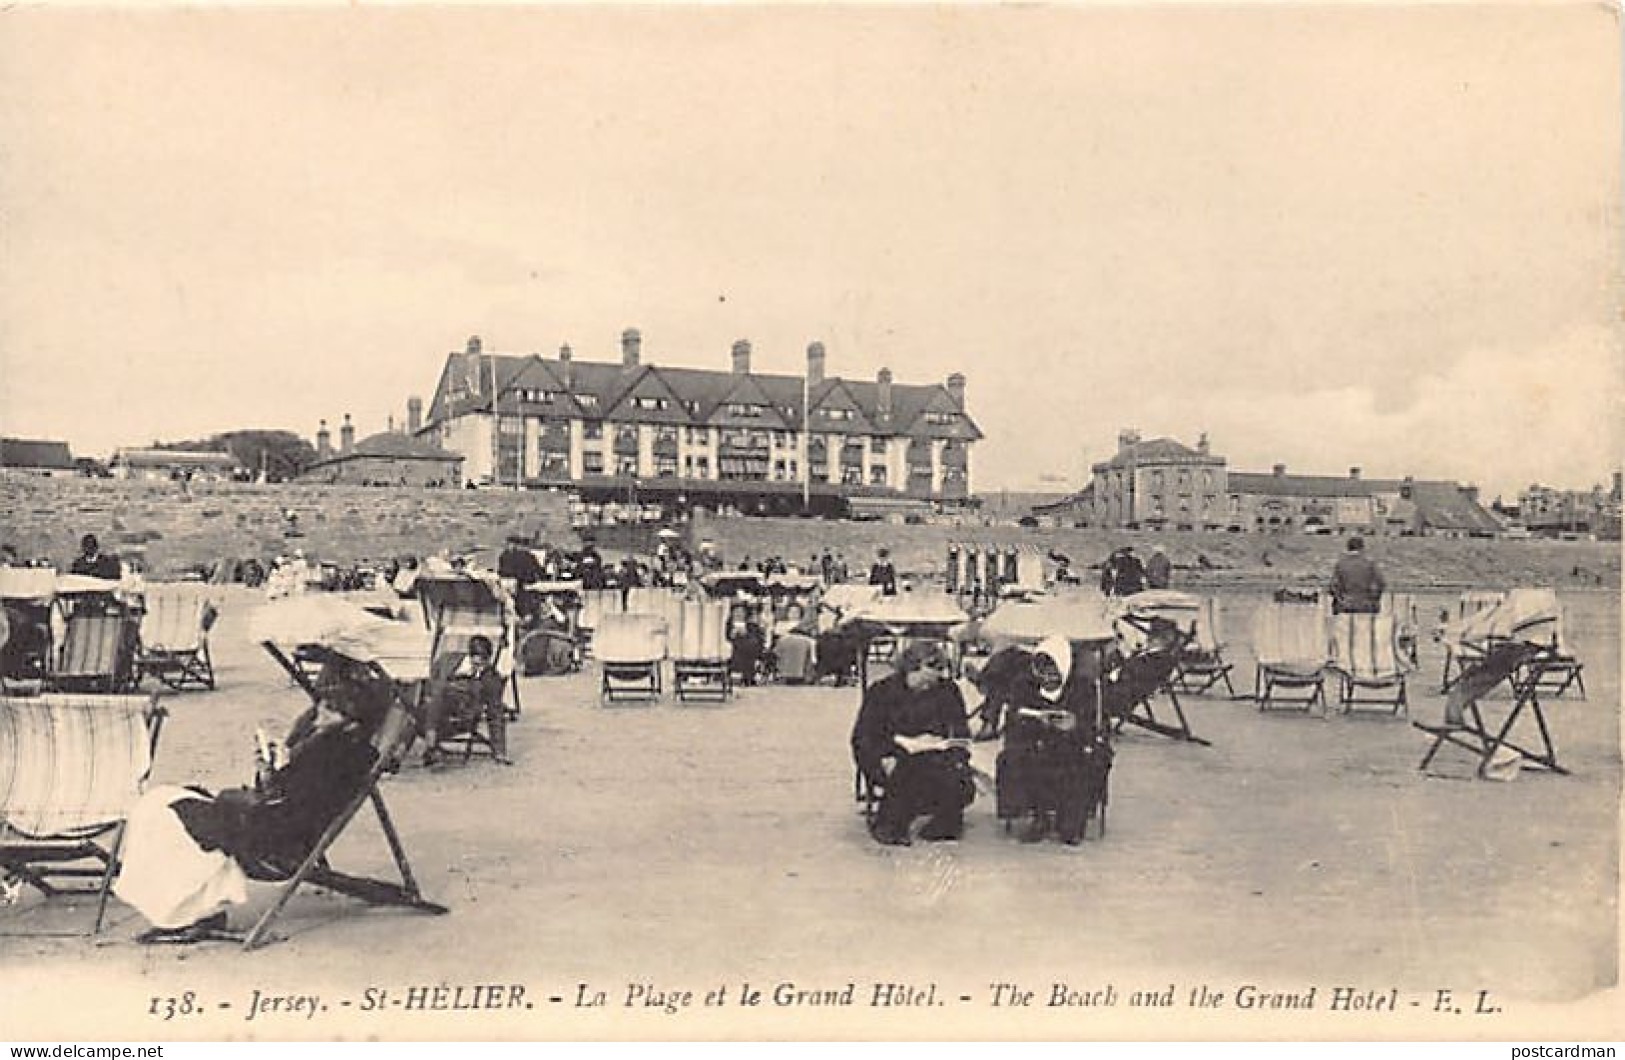 Jersey - SAINT-HELIER - The Beach And The Grand Hotel - Publ. E. L. 138 - St. Helier